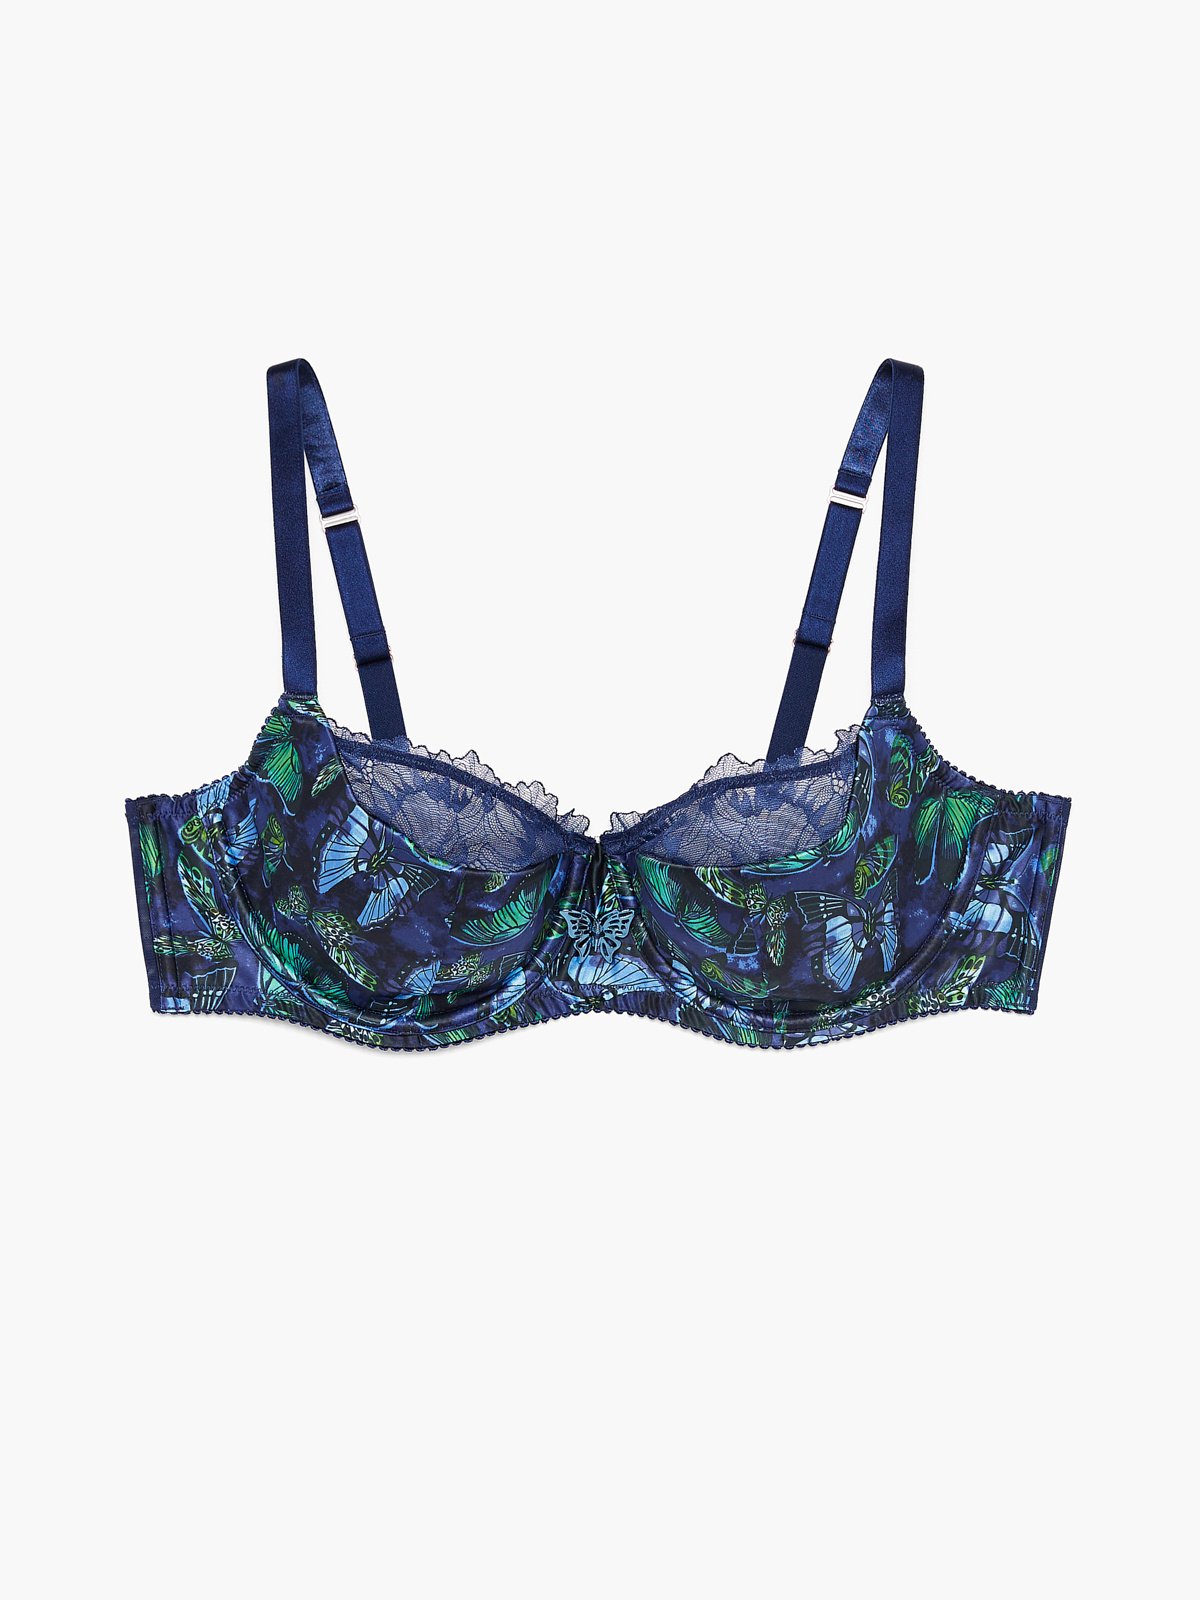 Savage X Fenty, Women's, Floral Lace Unlined Bra, Sheer lace Cups, Lace,  Underwire, Blue Periwinkle Ombré, 36A